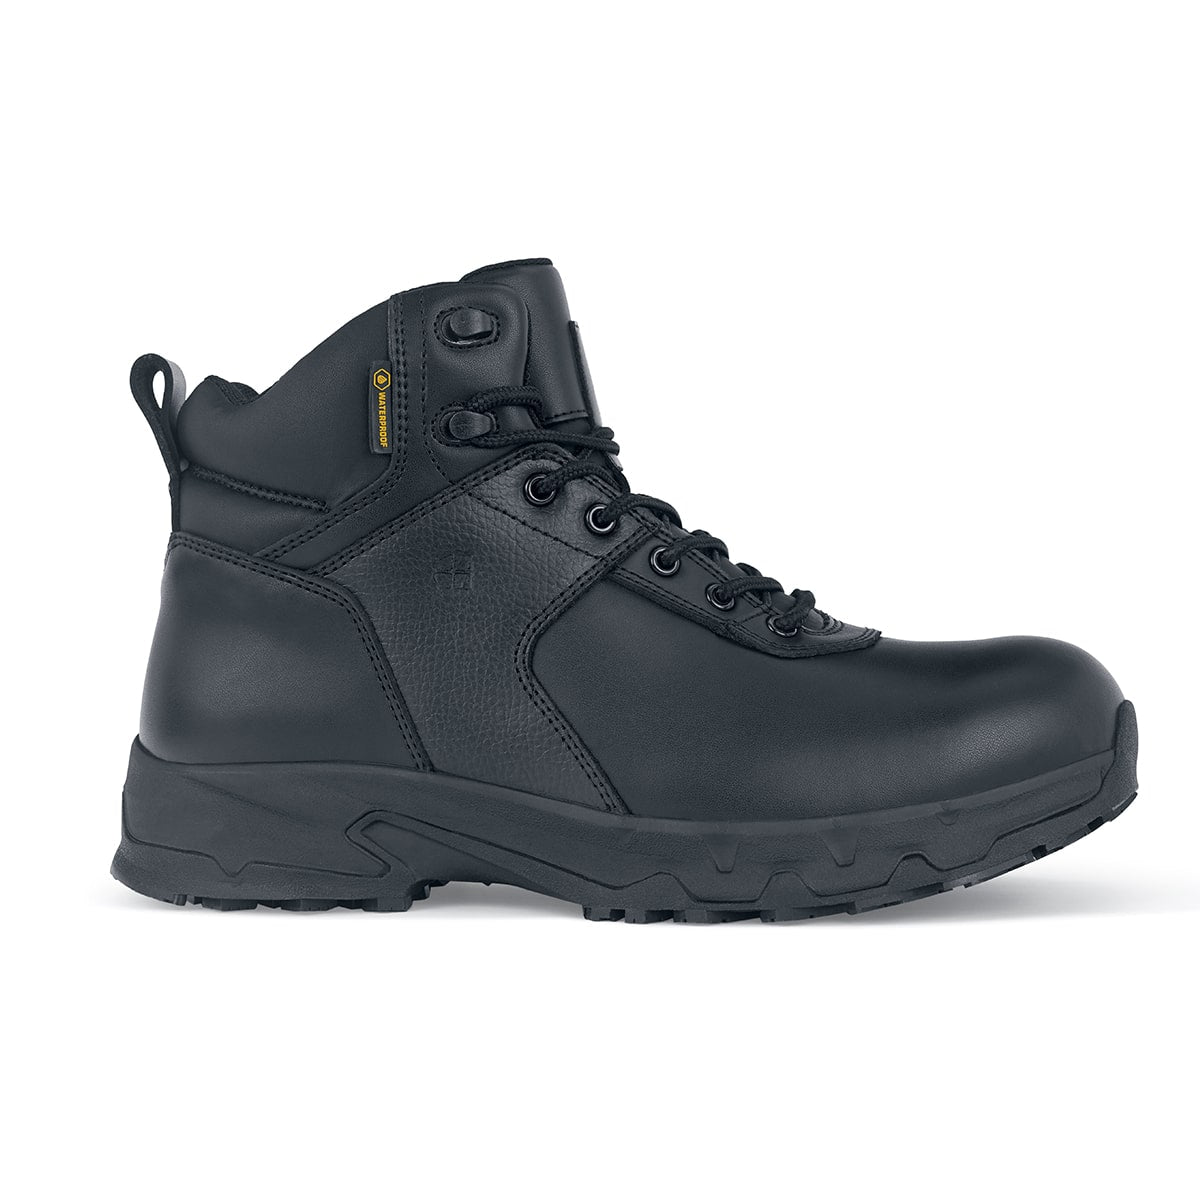 The Engineer IV CT from Shoes For Crews is an slip-resistant safety shoe designed to provide unbeatable comfort and protection throughout the working day, seen from the right.